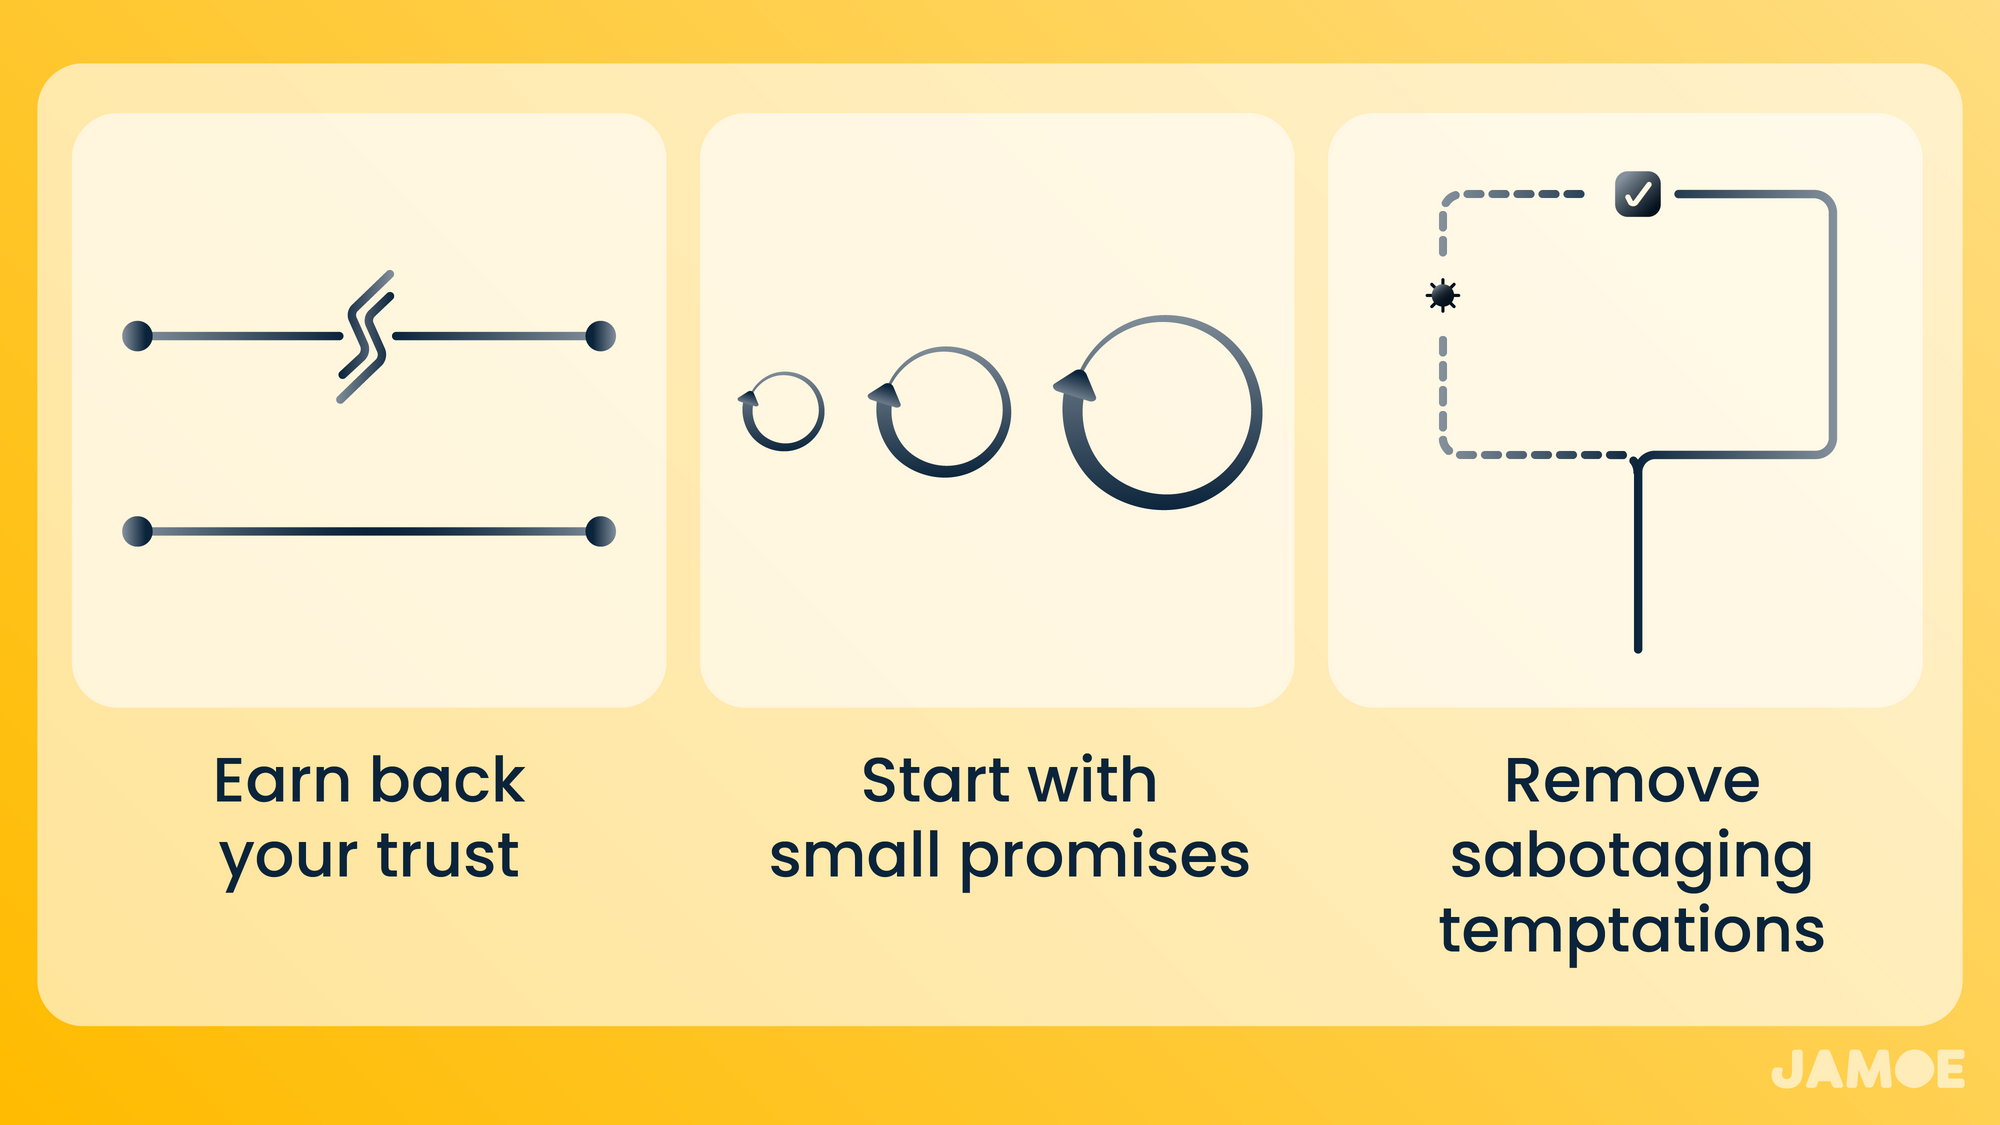 The three steps for building a stronger bias for playing the long game: 1) earn back your trust 2) start with small promises and 3) remove sabotaging temptations.